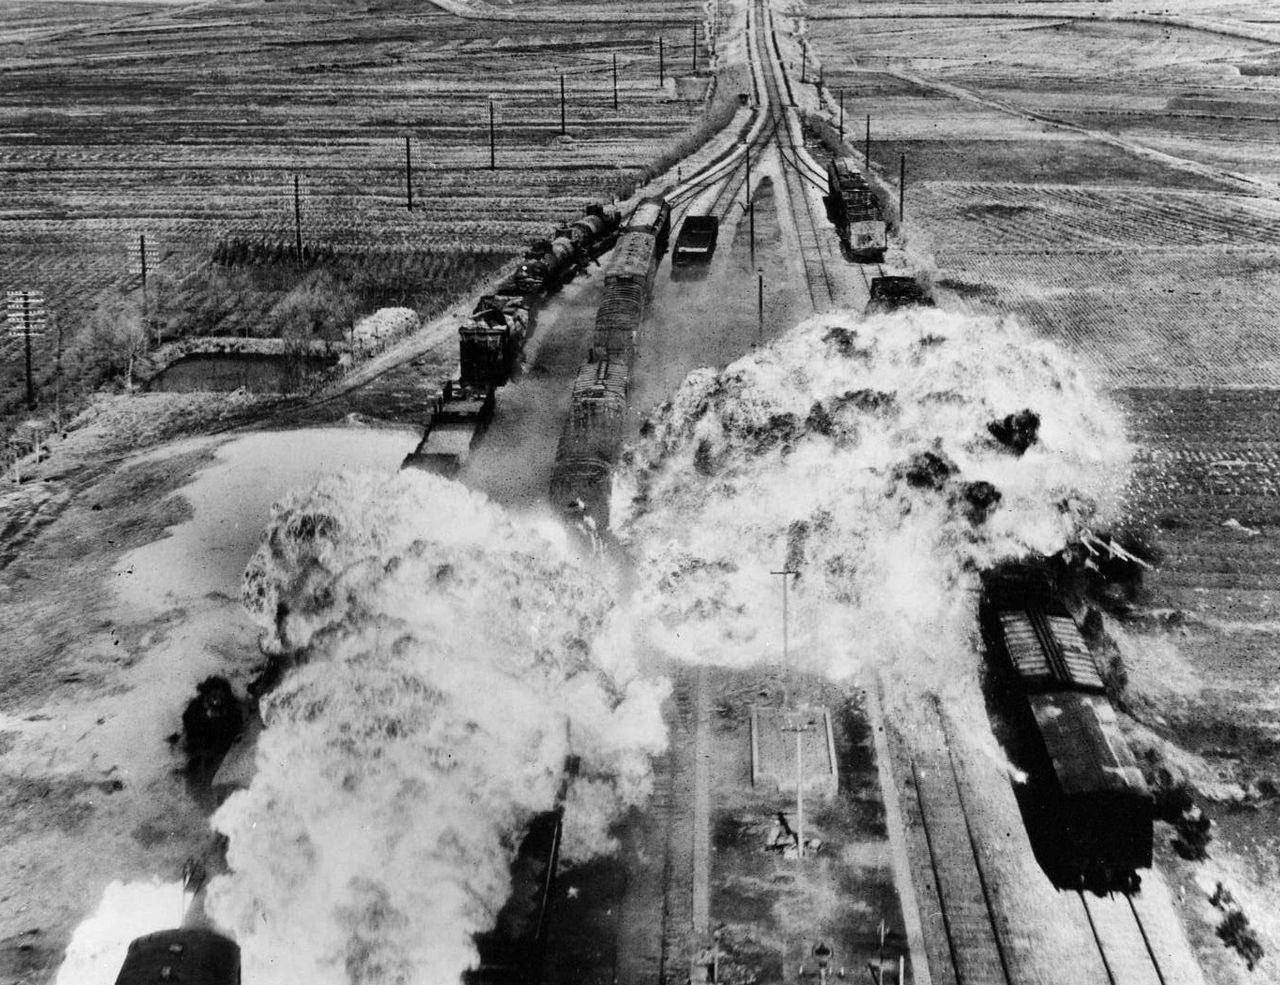 While trains were used to transport U.S. Soldiers and their equipment during the Korean War, trains in North Korea were targets of attack by U.S. and other U.N. forces. Here, U.S. forces target rail cars south of Wonsan, North Korea, an east coast port city